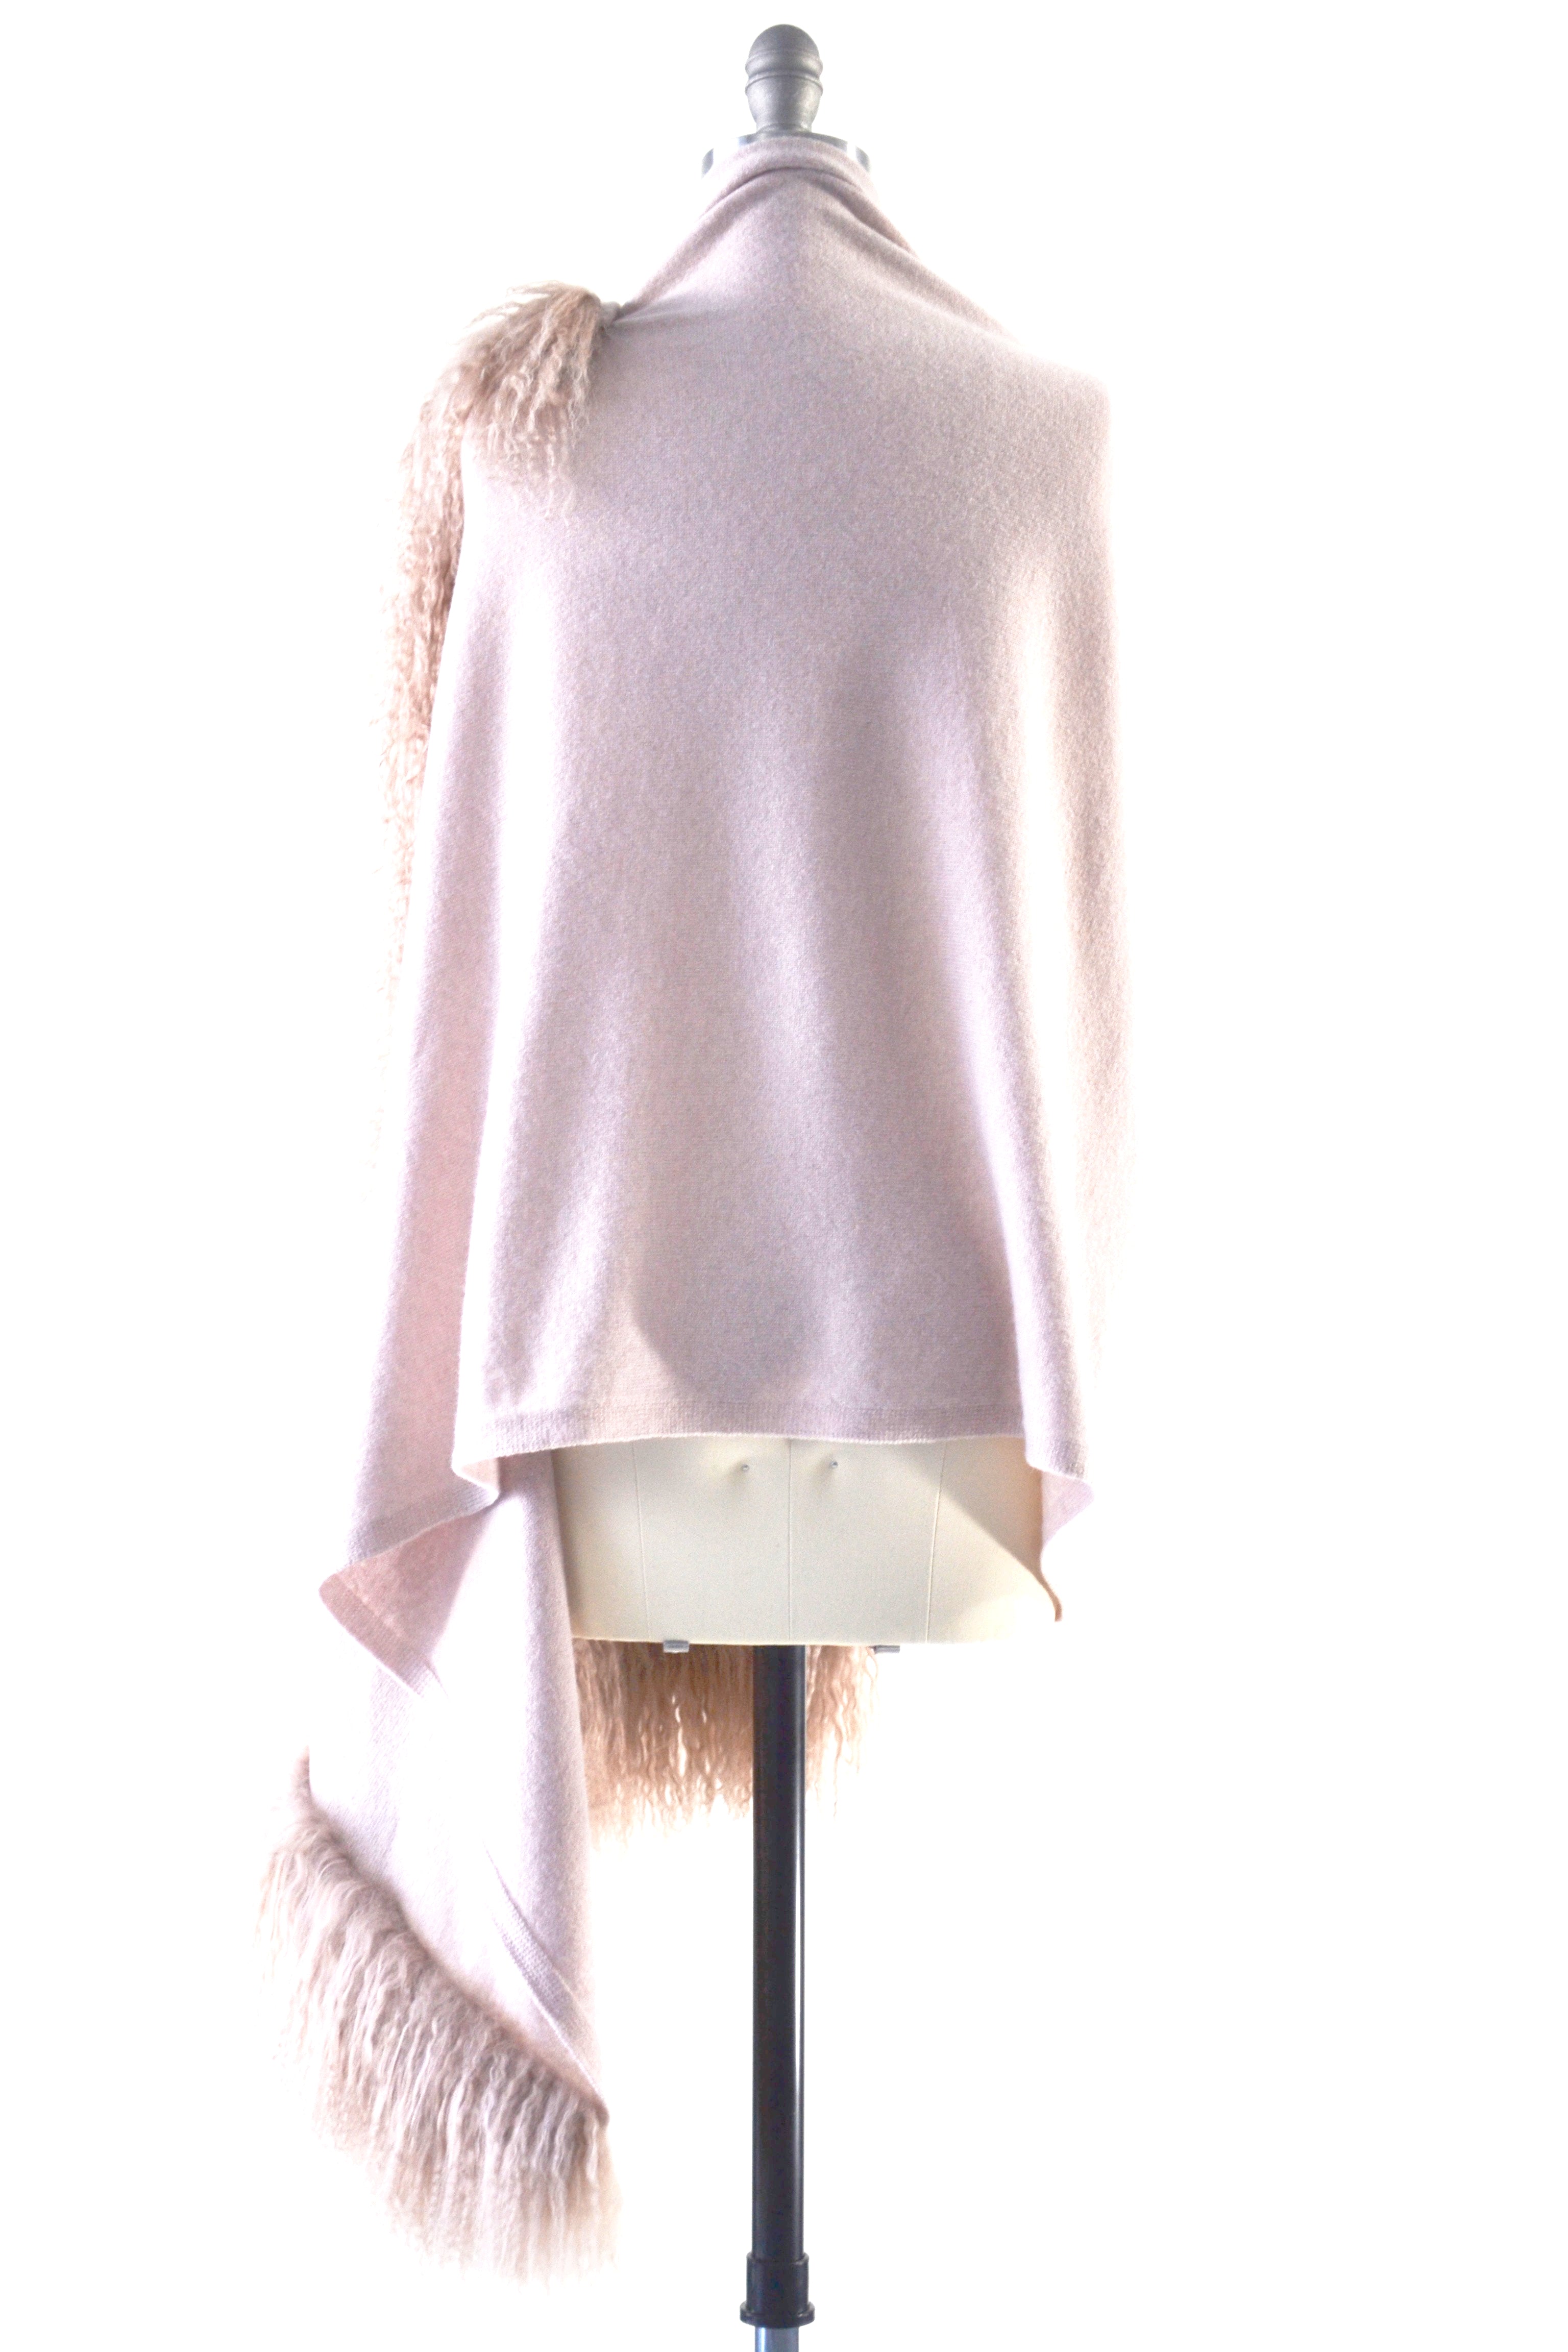 Cashmere Shawl with Double Curly Tibetan Sheep Fur in Blush